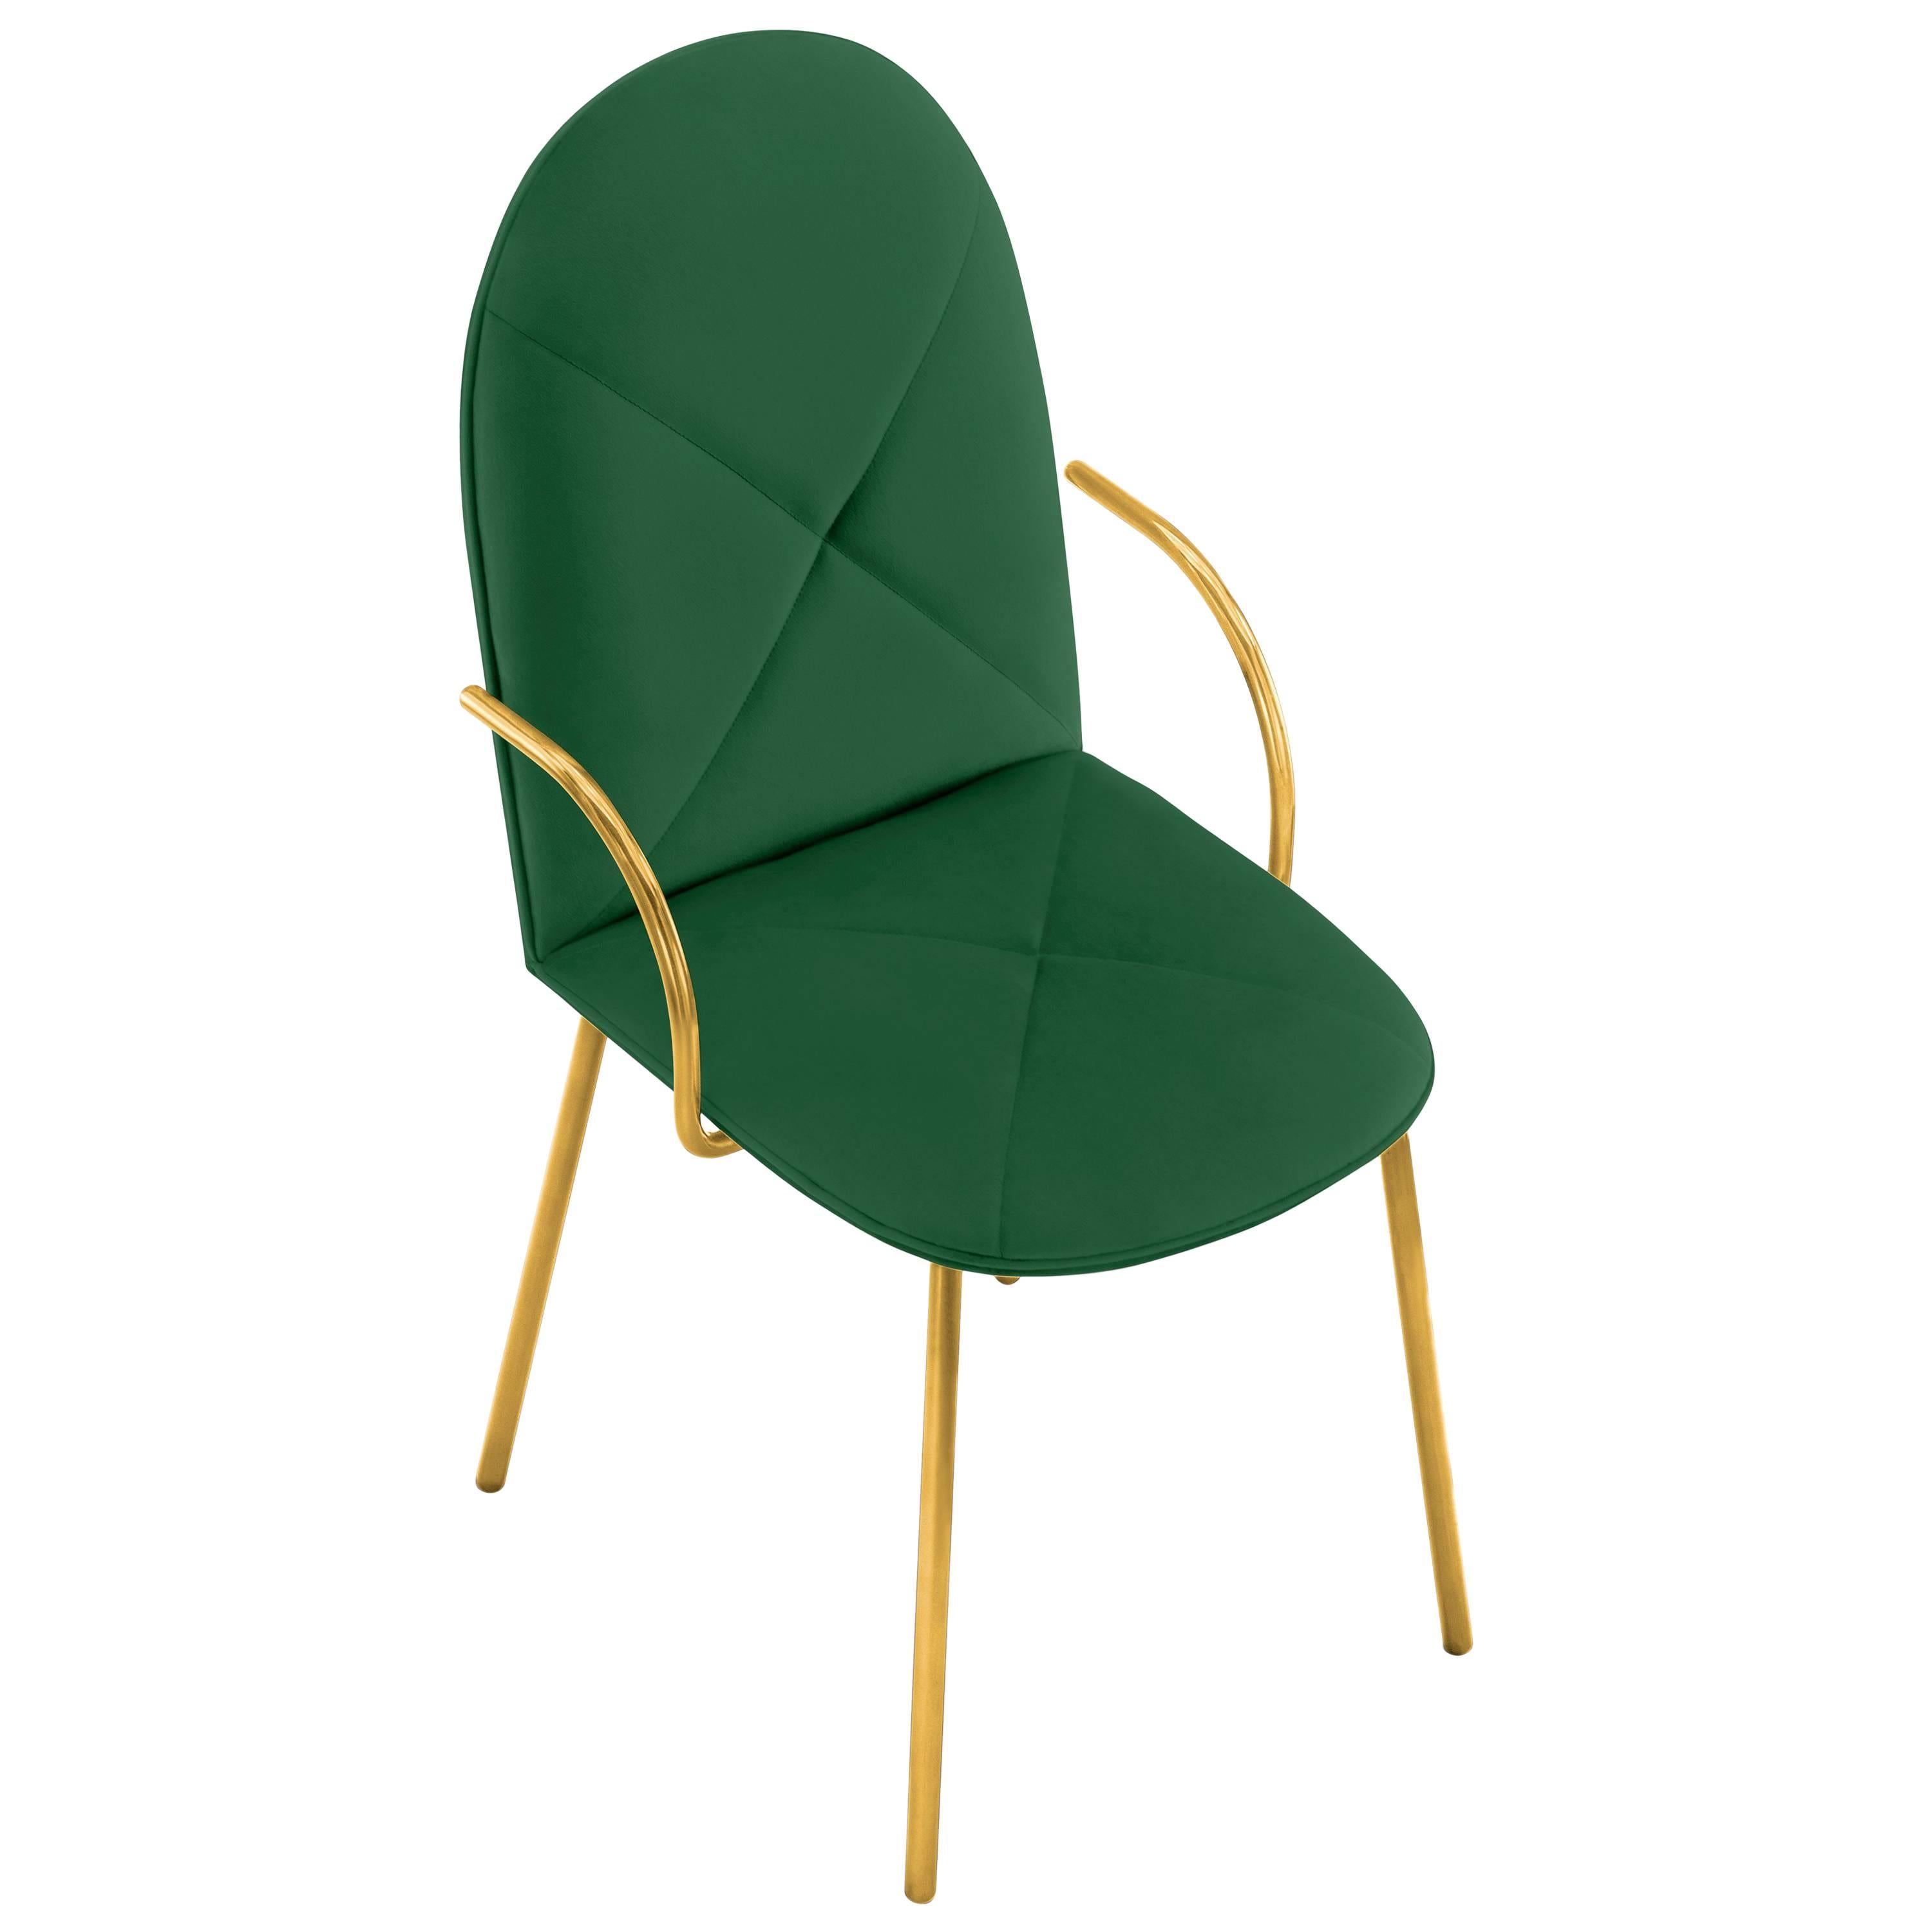 Orion Chair Green by Nika Zupanc for Scarlet Splendour For Sale